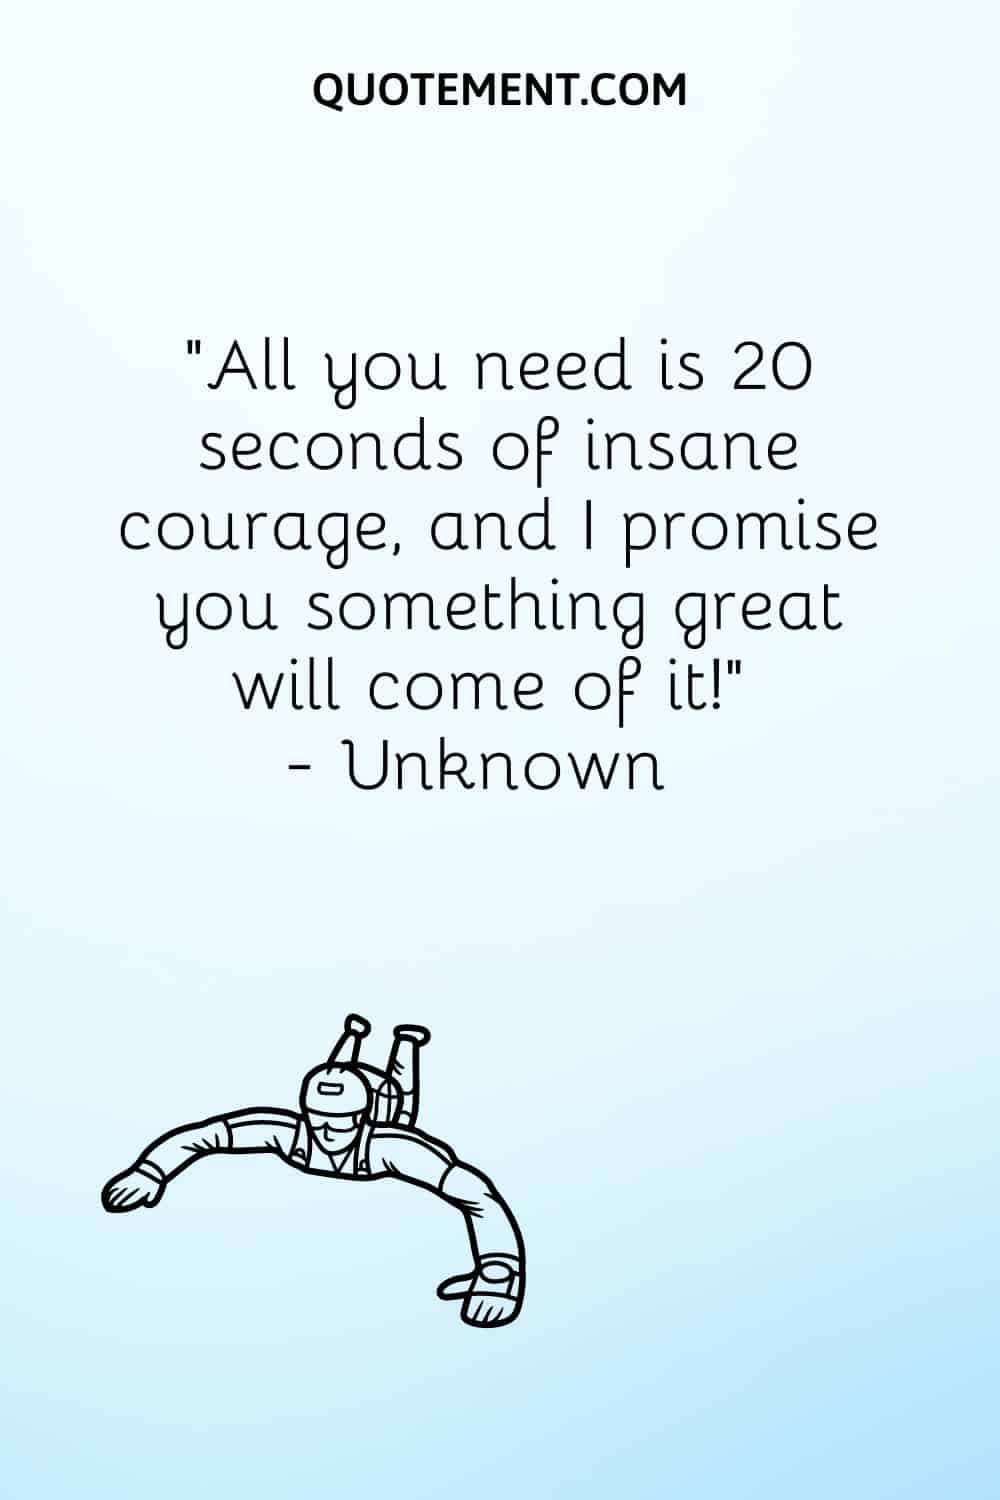 All you need is 20 seconds of insane courage, and I promise you something great will come of it